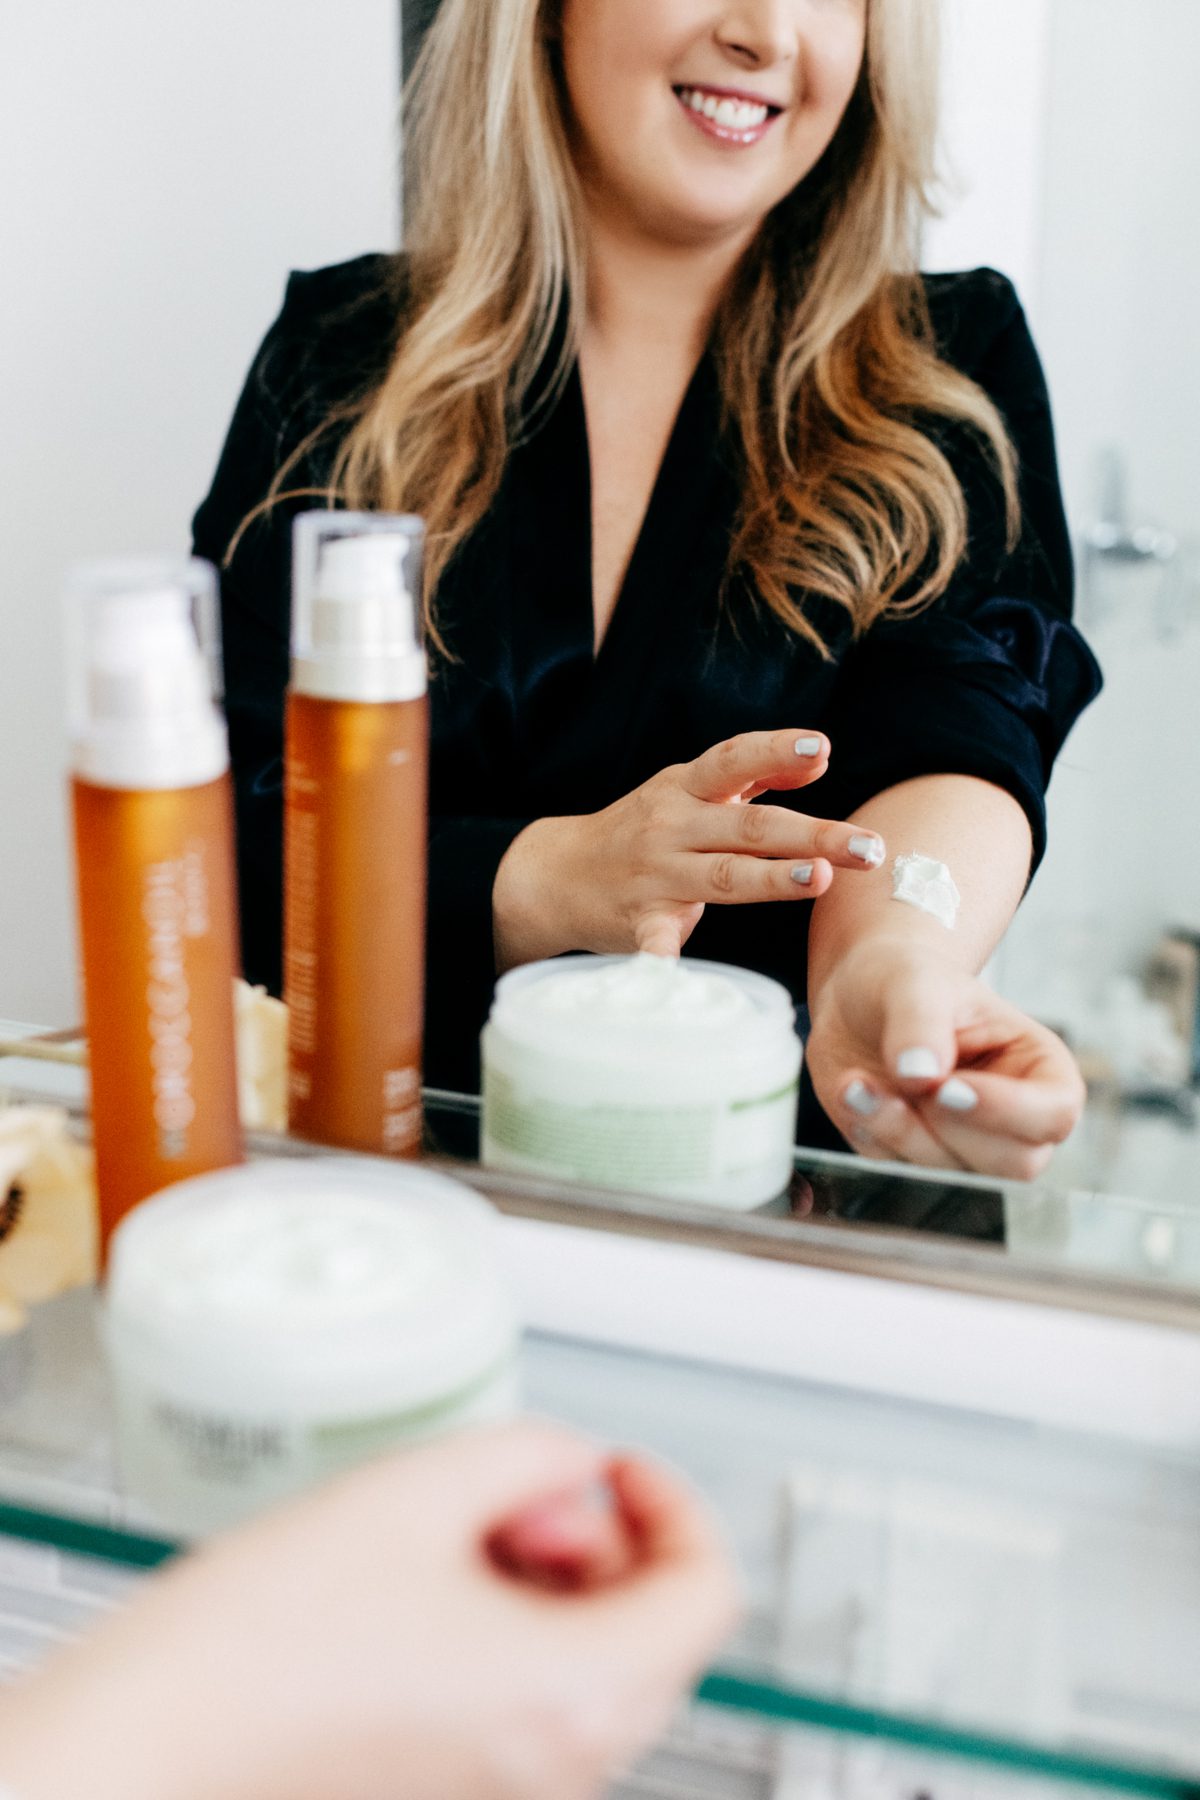 4 of My Latest Favorite Body Products You Need This Winter